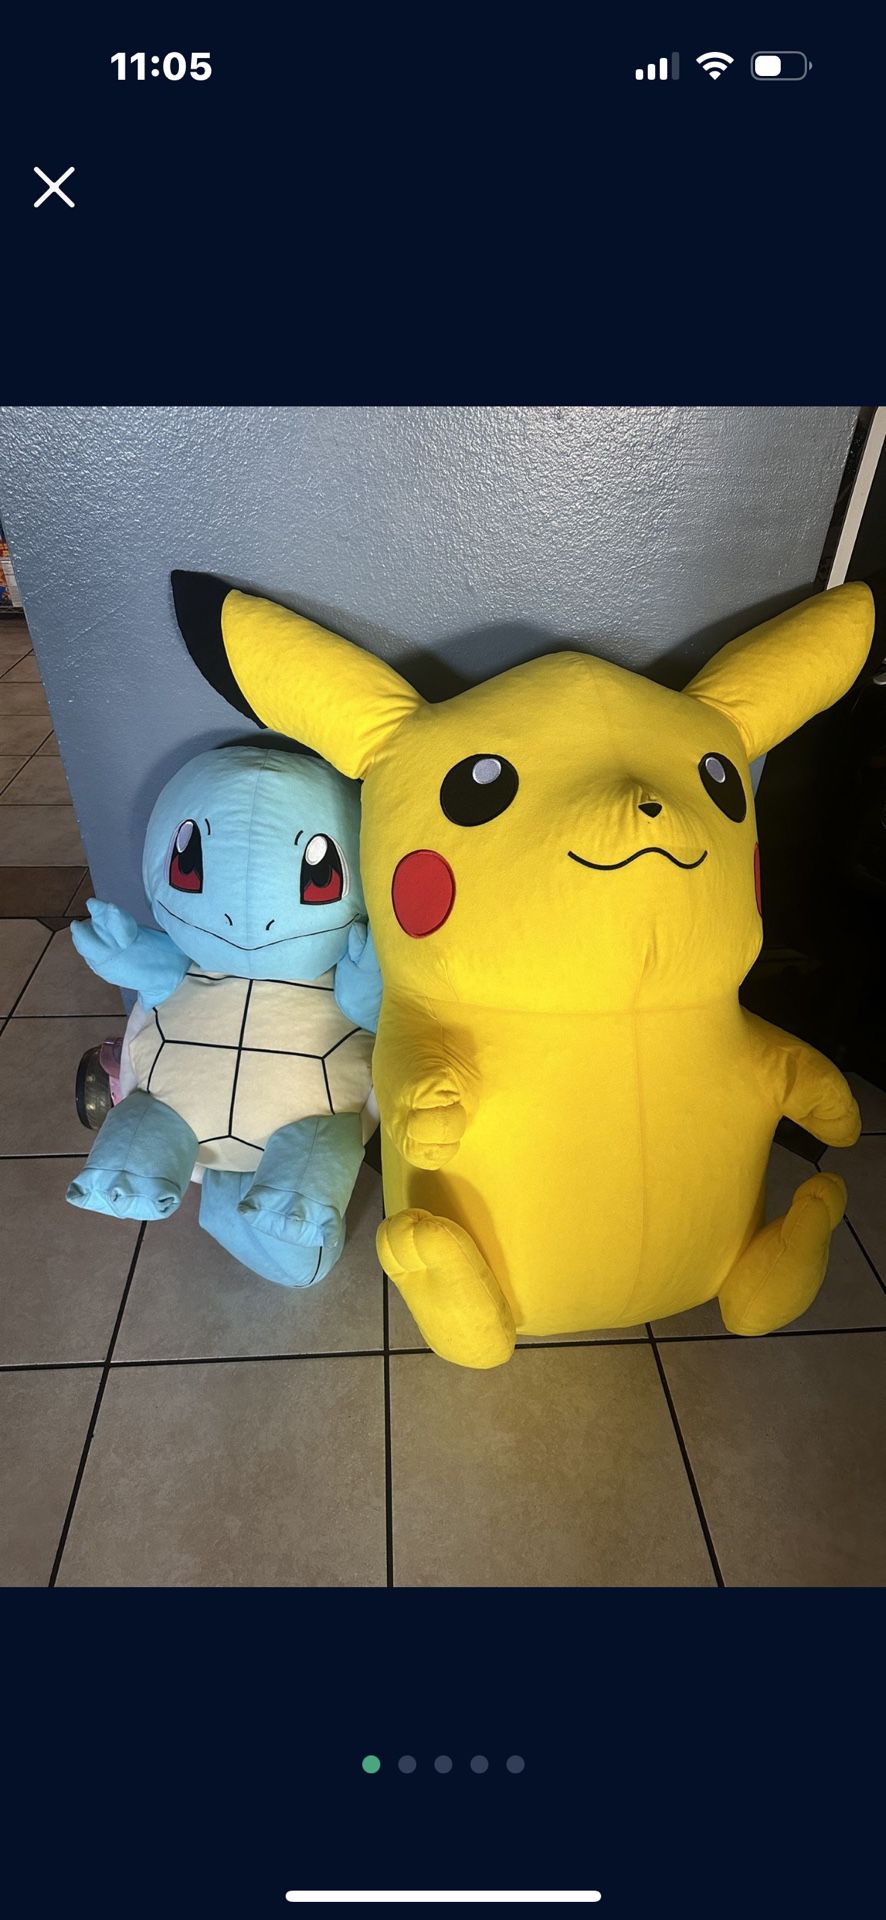 Giant Pikachu and Squirtle Pokemon Plushies